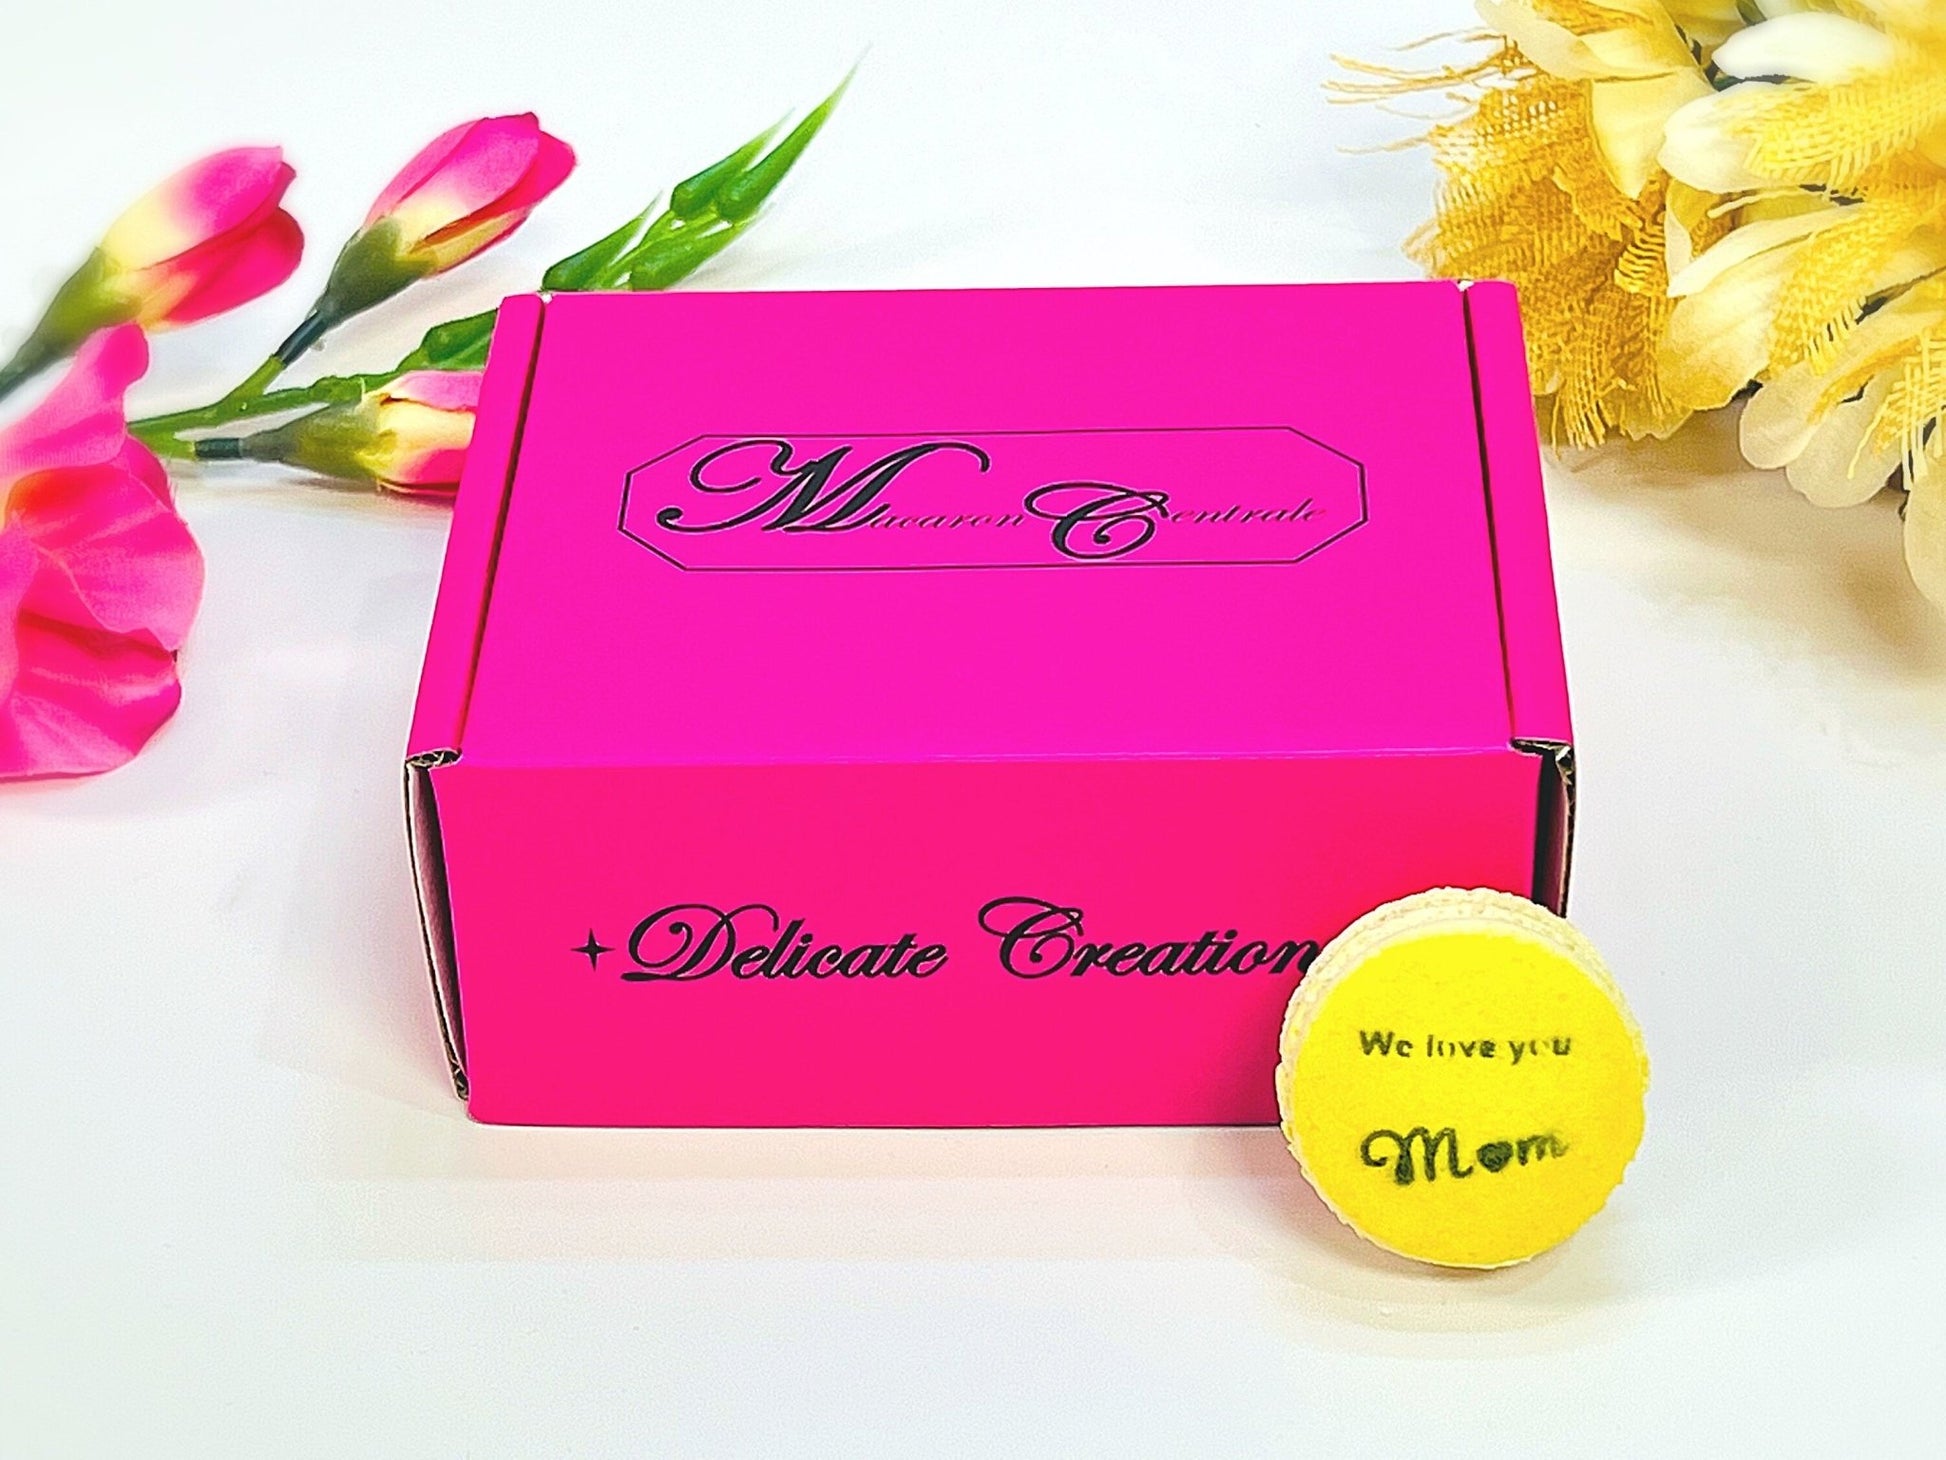 I Love You, Mom French Macaron | Customizable Flavor Macarons | Available in 6, 12, 24 Pack - Macaron Centrale6 PackBlue